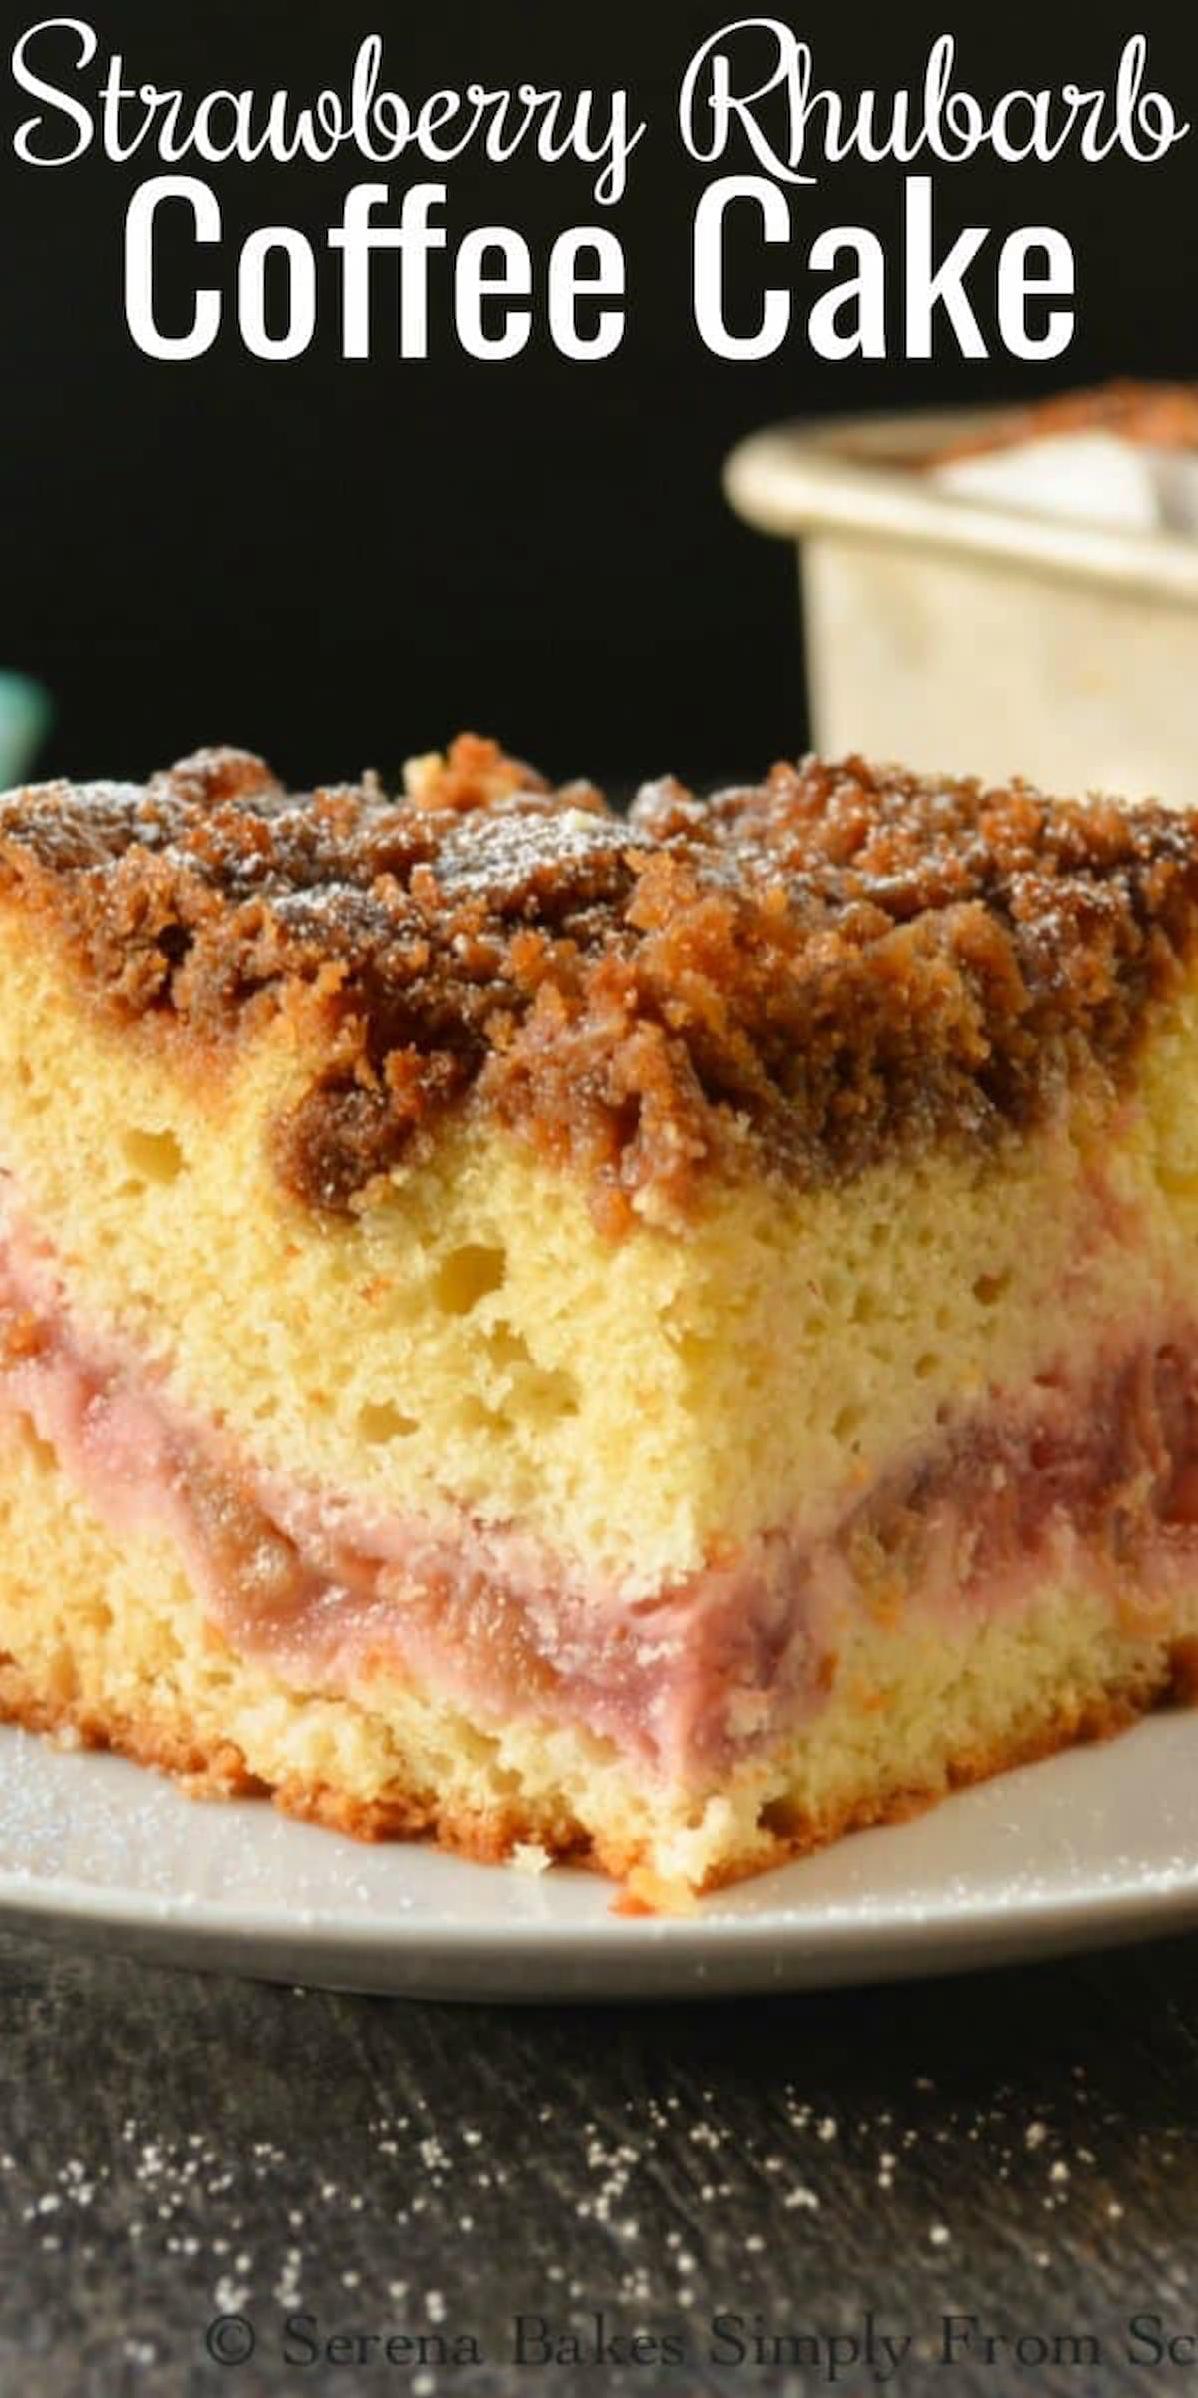  Don't be shy with the streusel topping - the crunchy texture is a must-have.